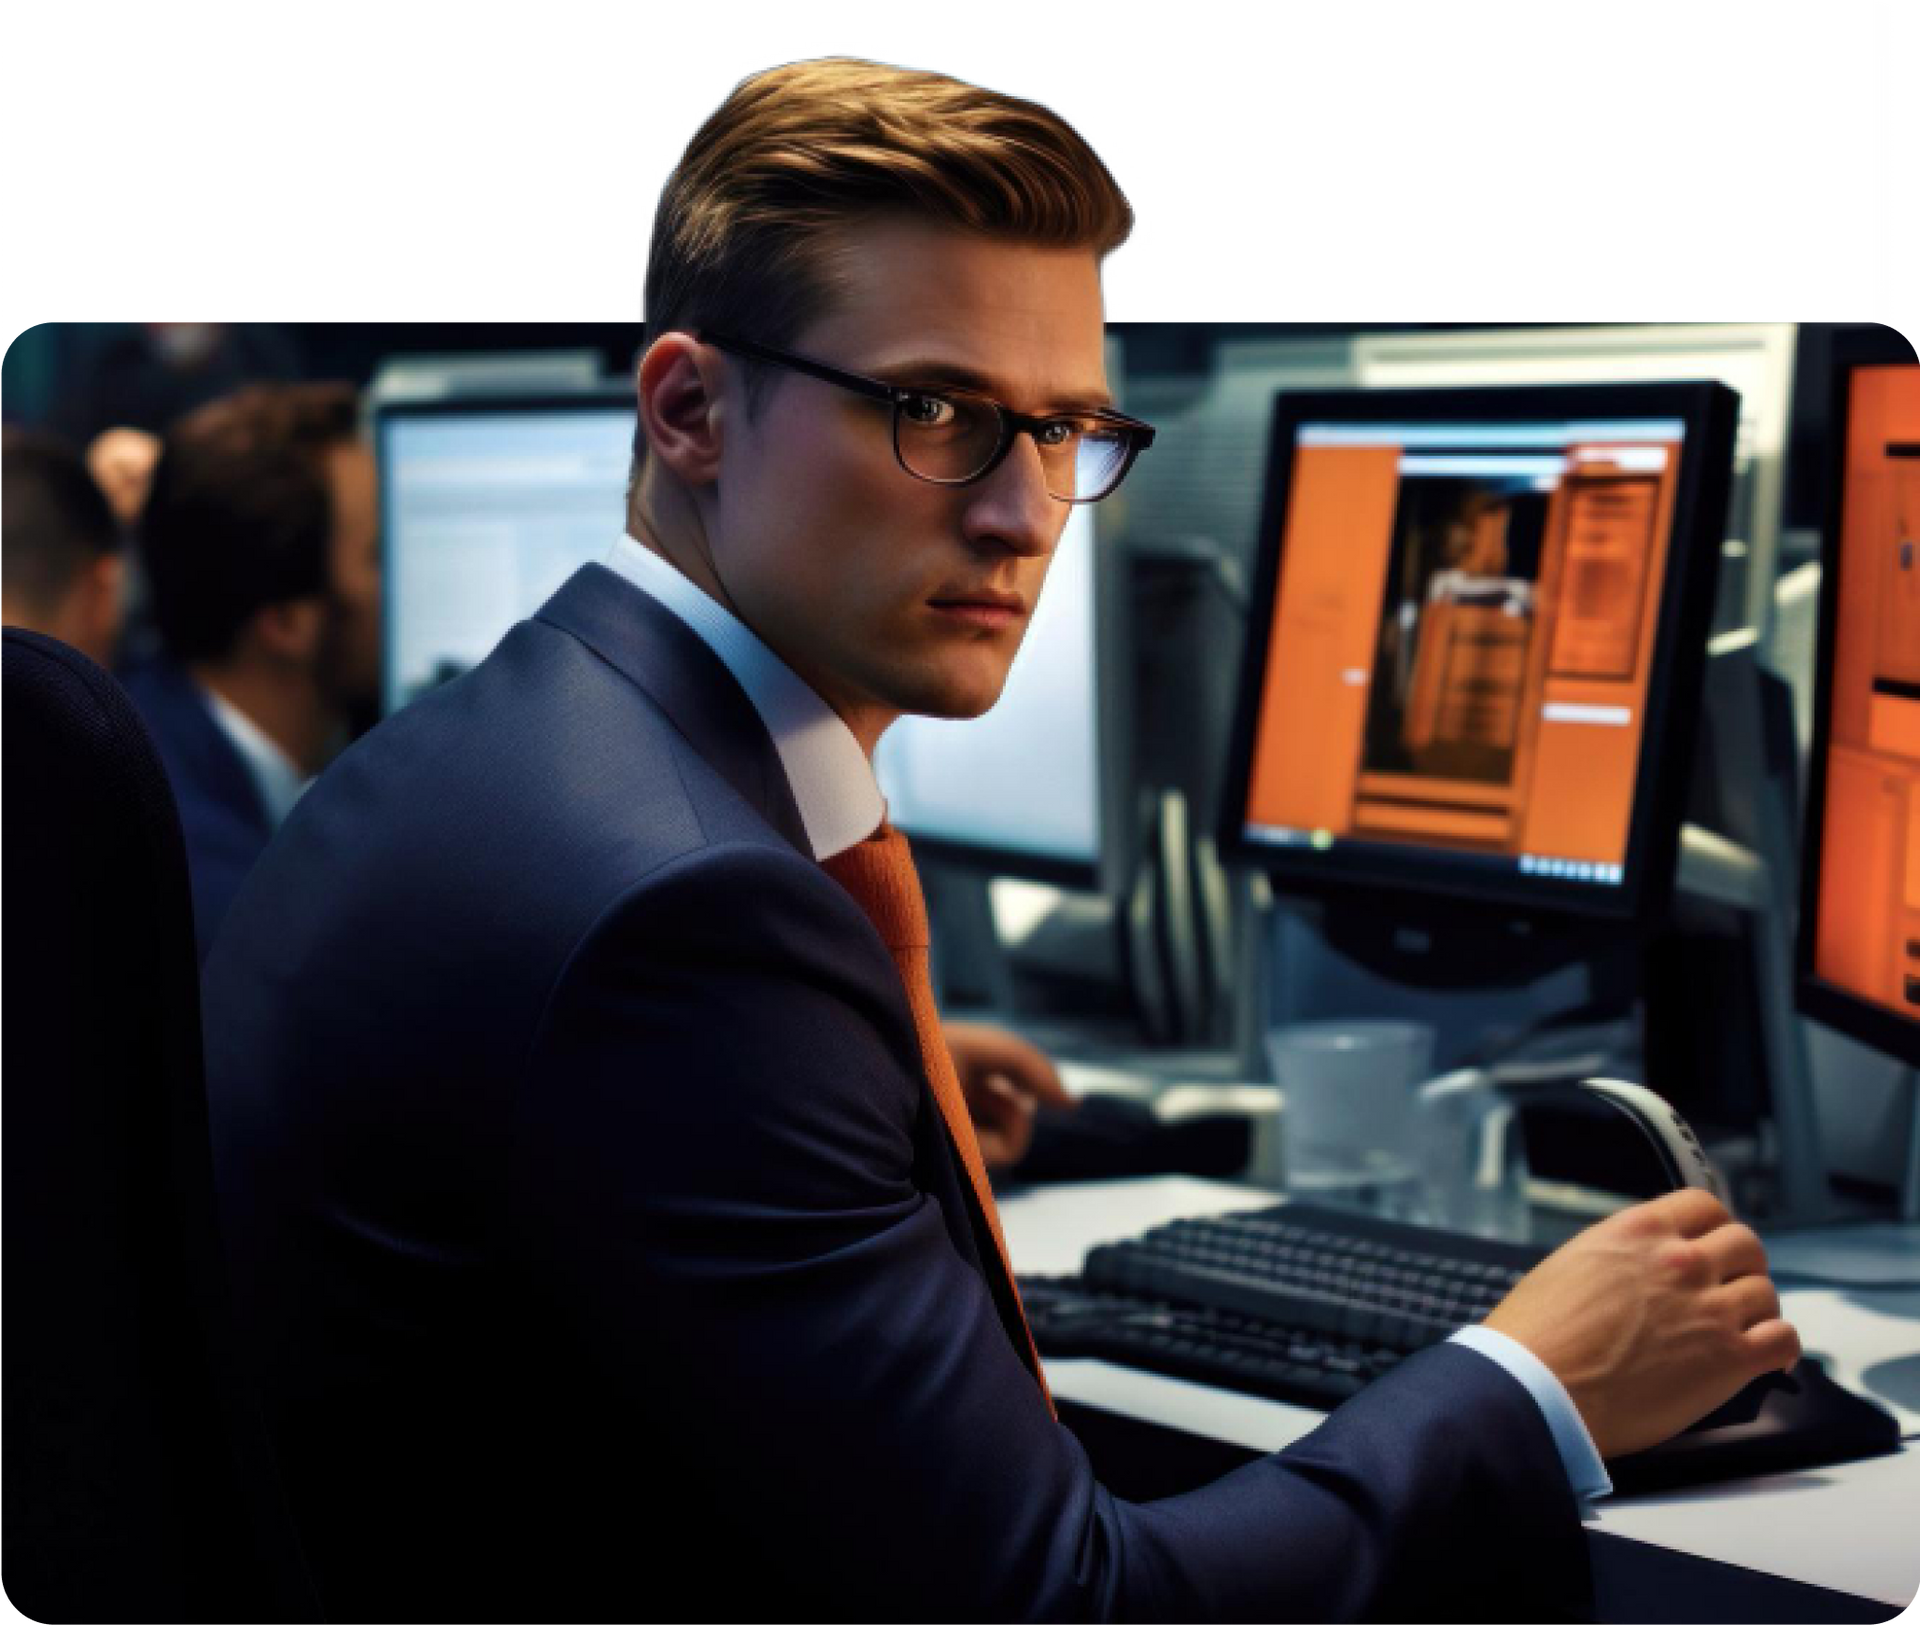 A man in a suit and tie is working on a computer